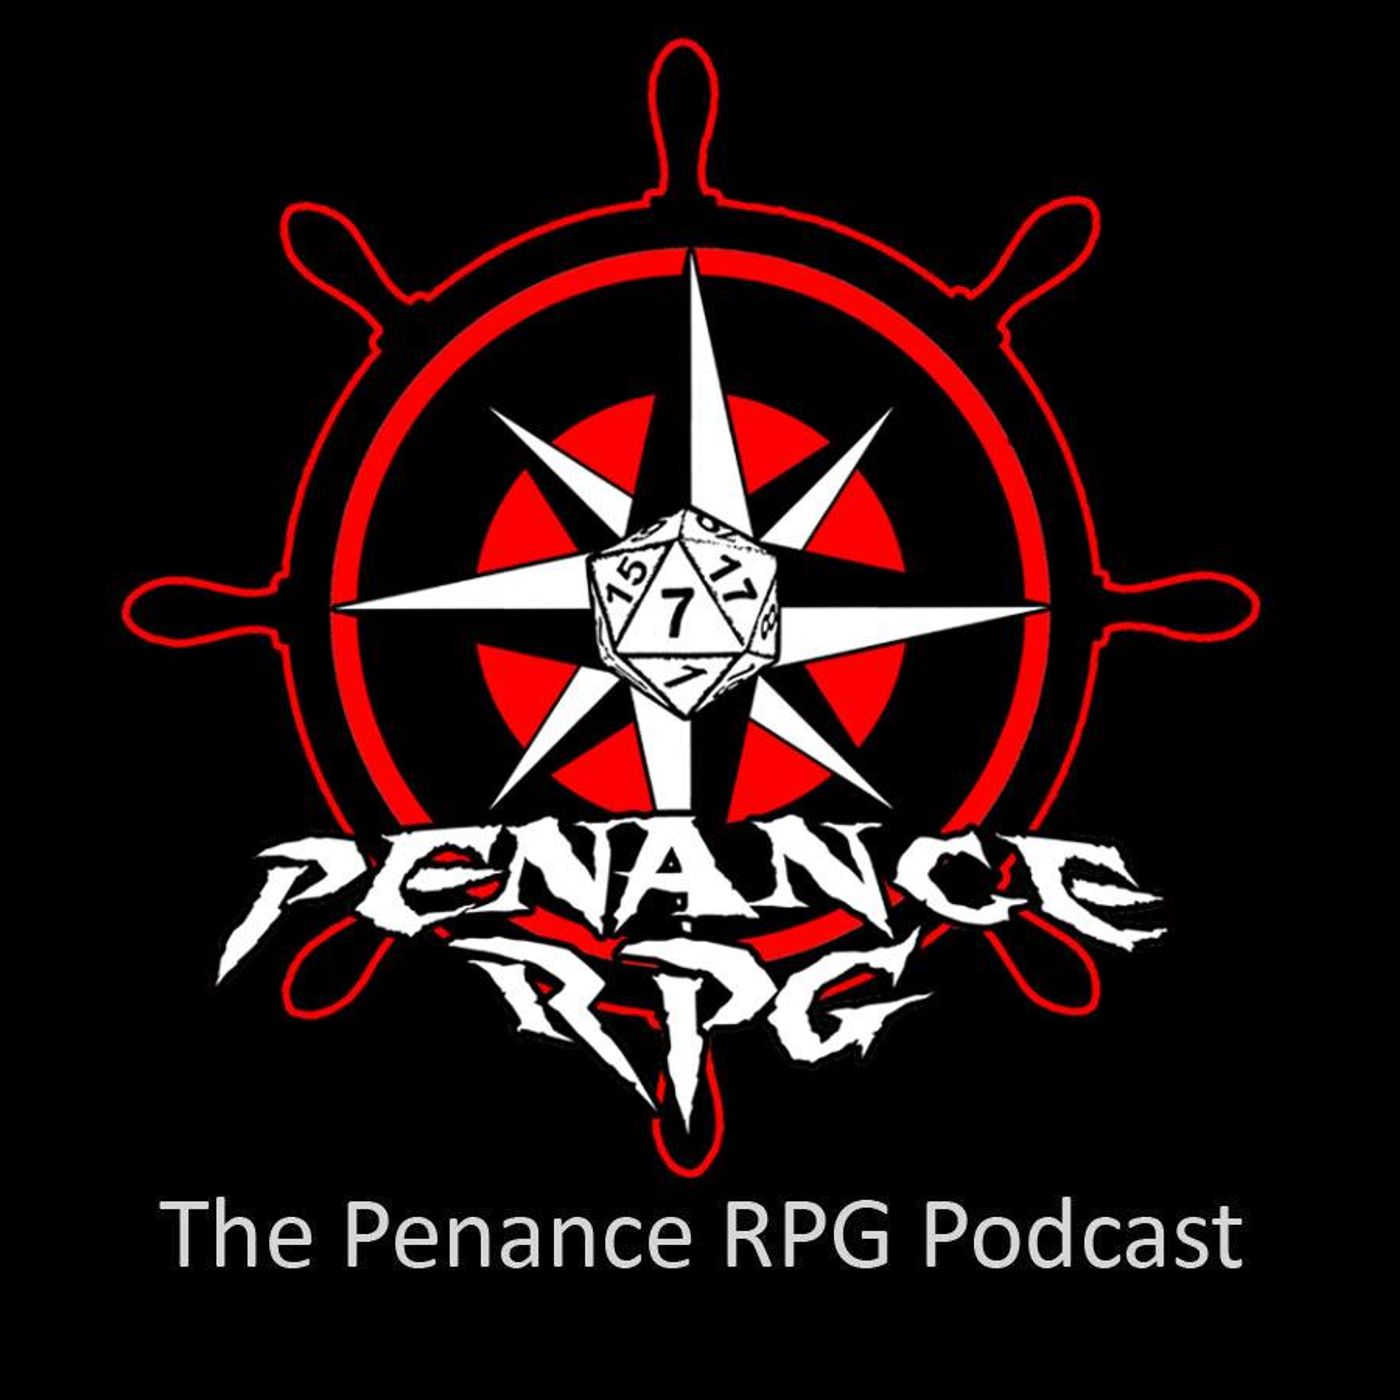 Attack Of Opportunity : The Penance RPG Podcast interview